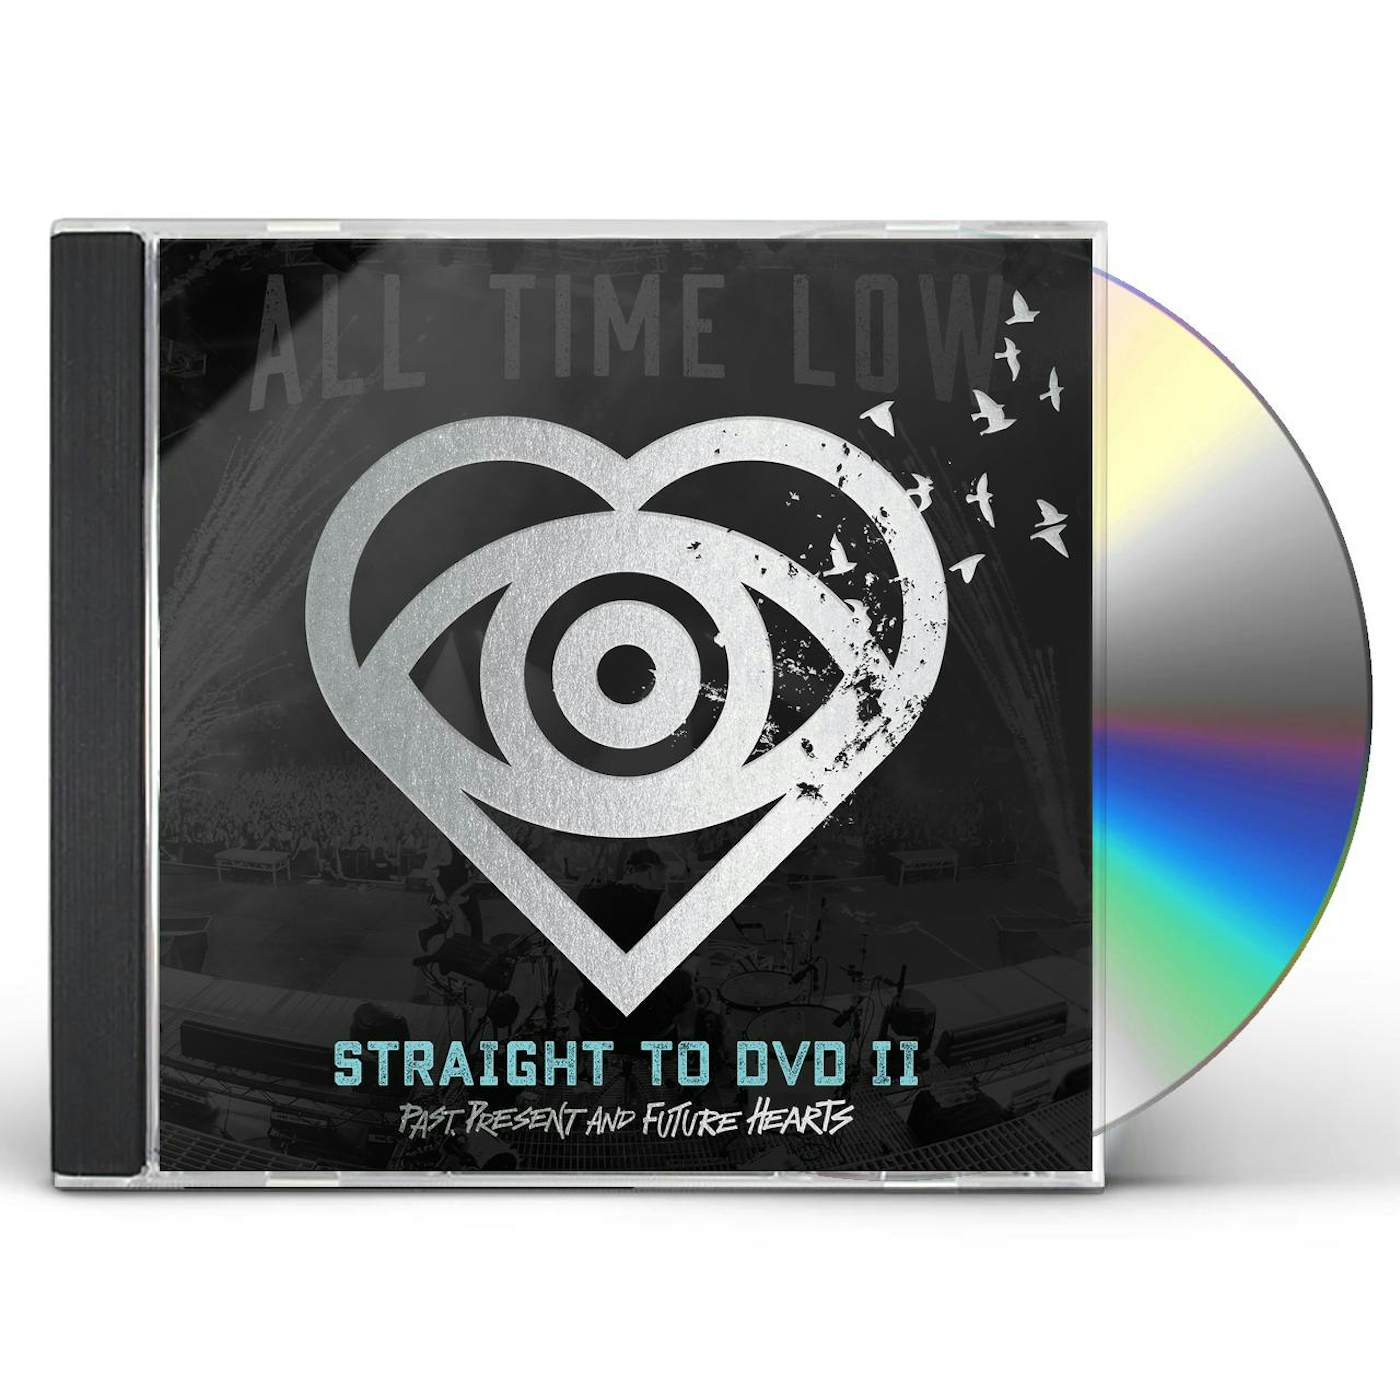 All Time Low STRAIGHT TO DVD II: PAST PRESENT & FUTURE HEARTS CD